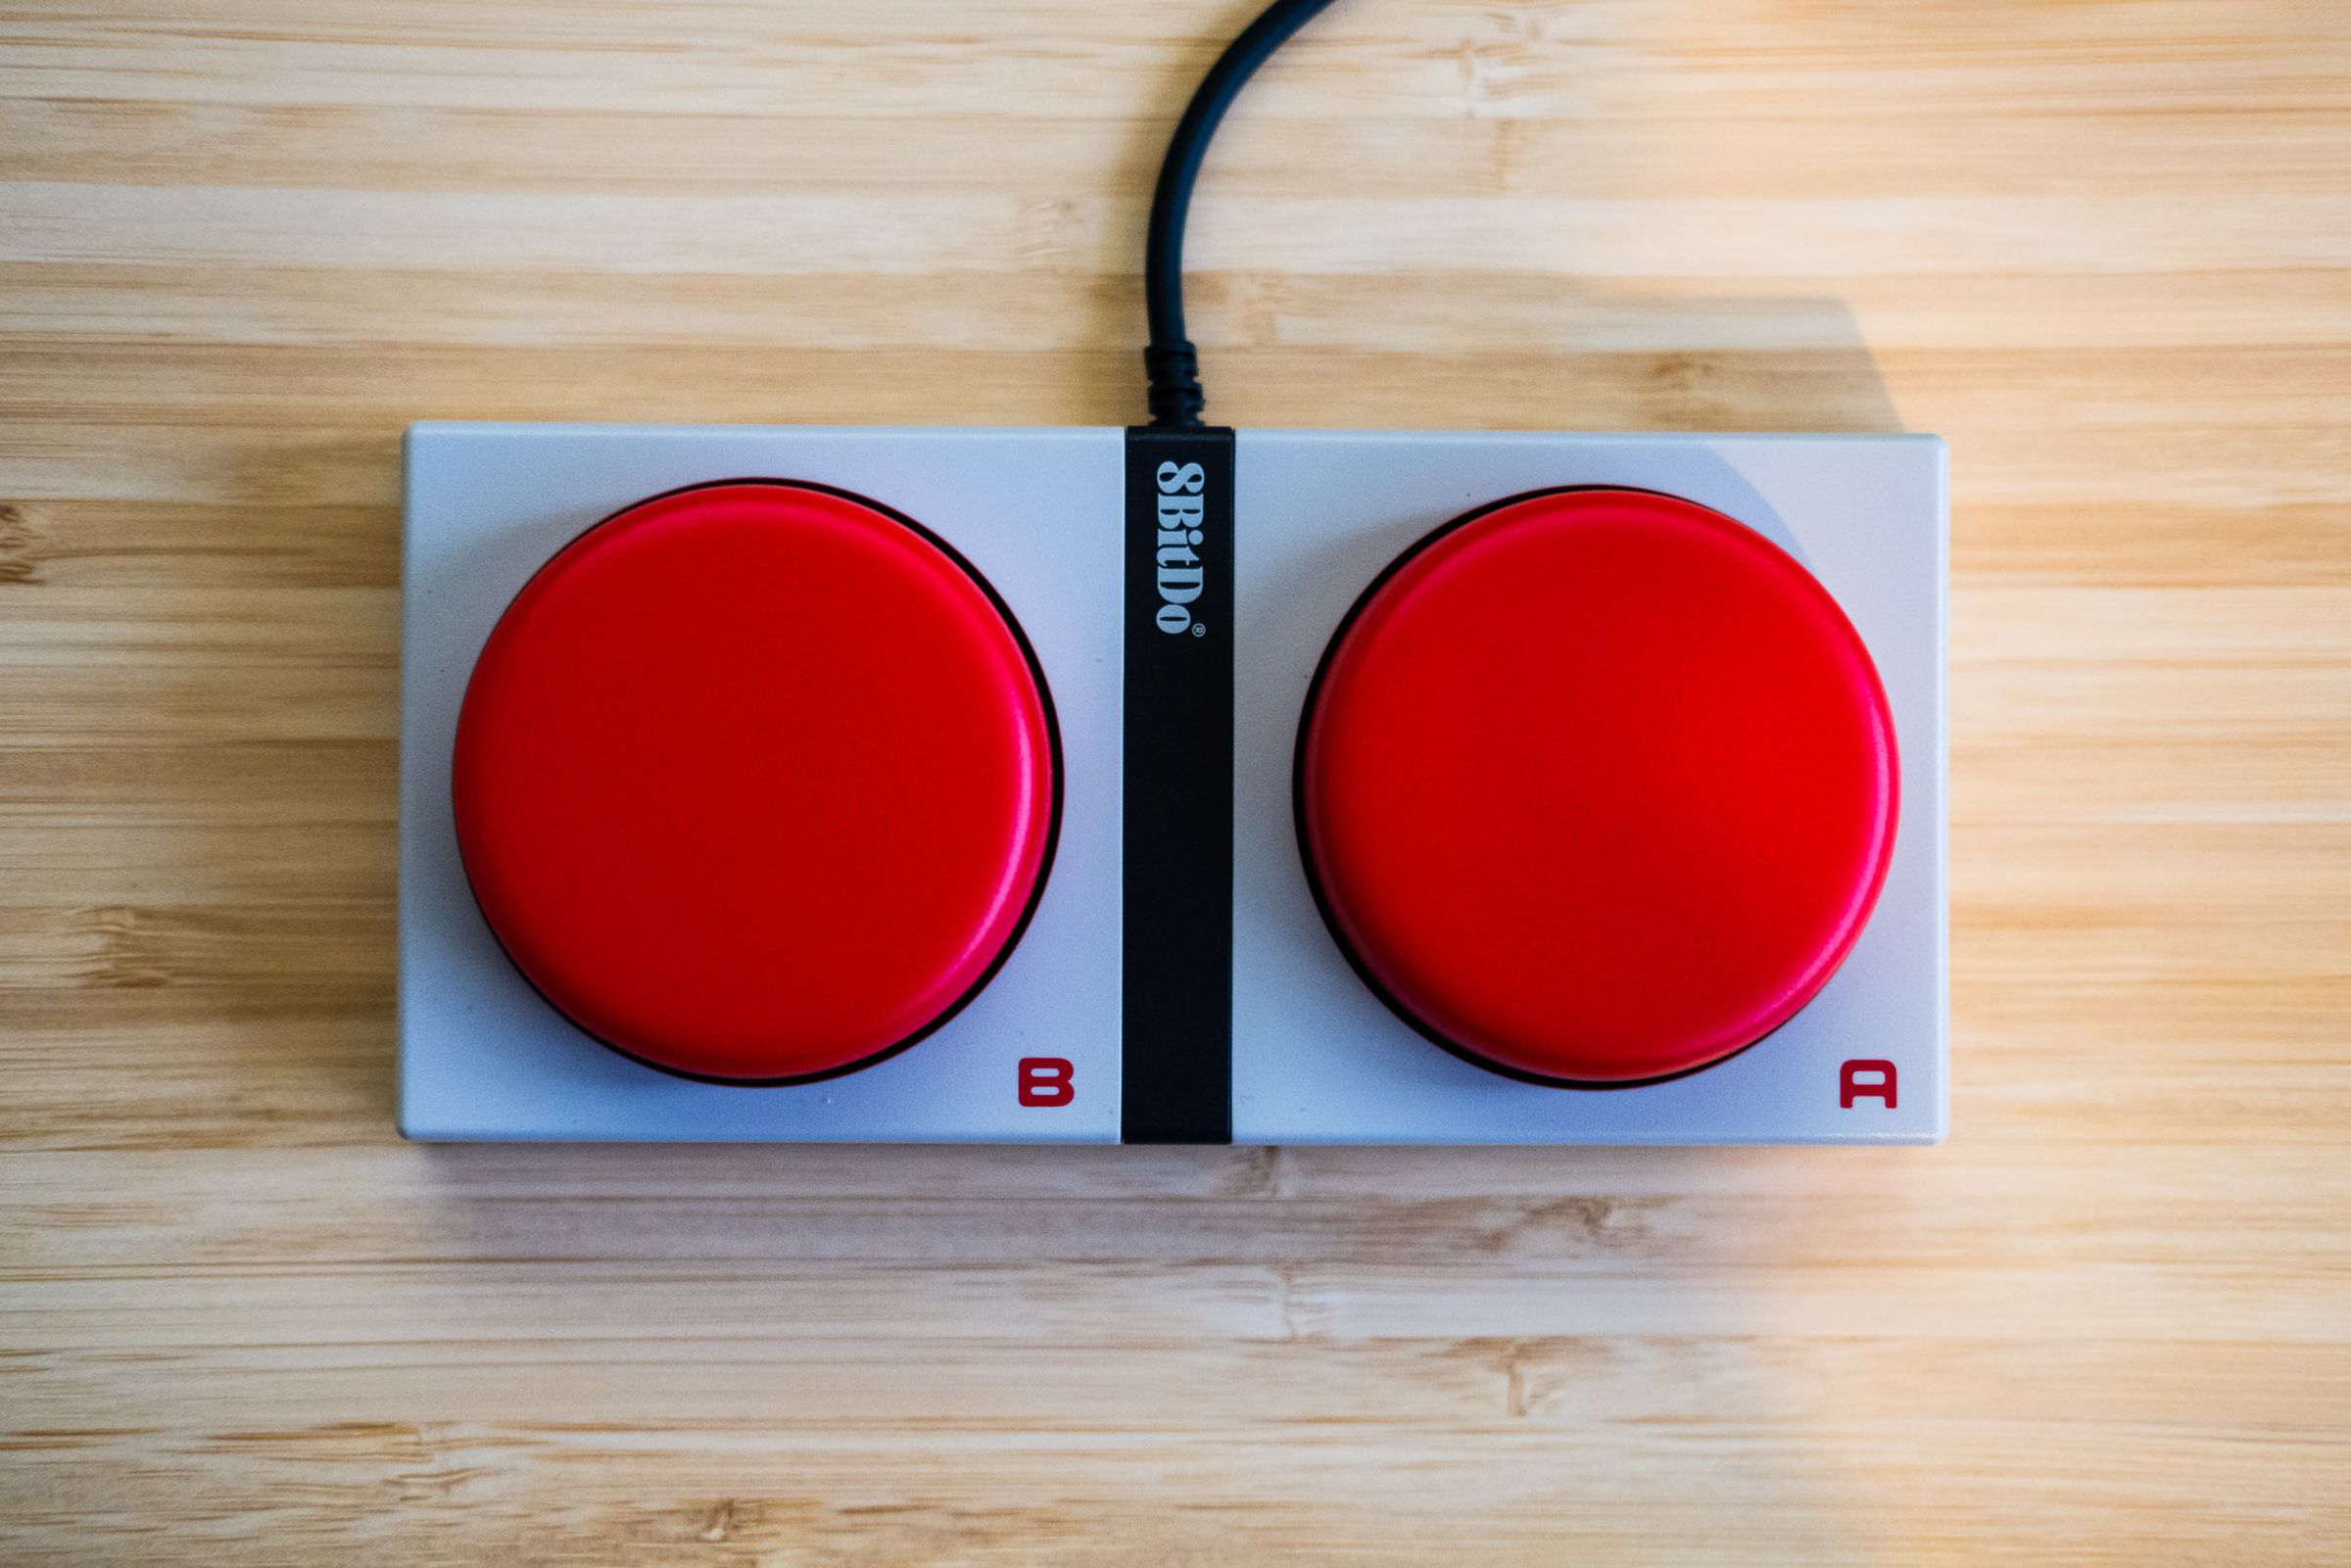 Dual Super Buttons from the top down.